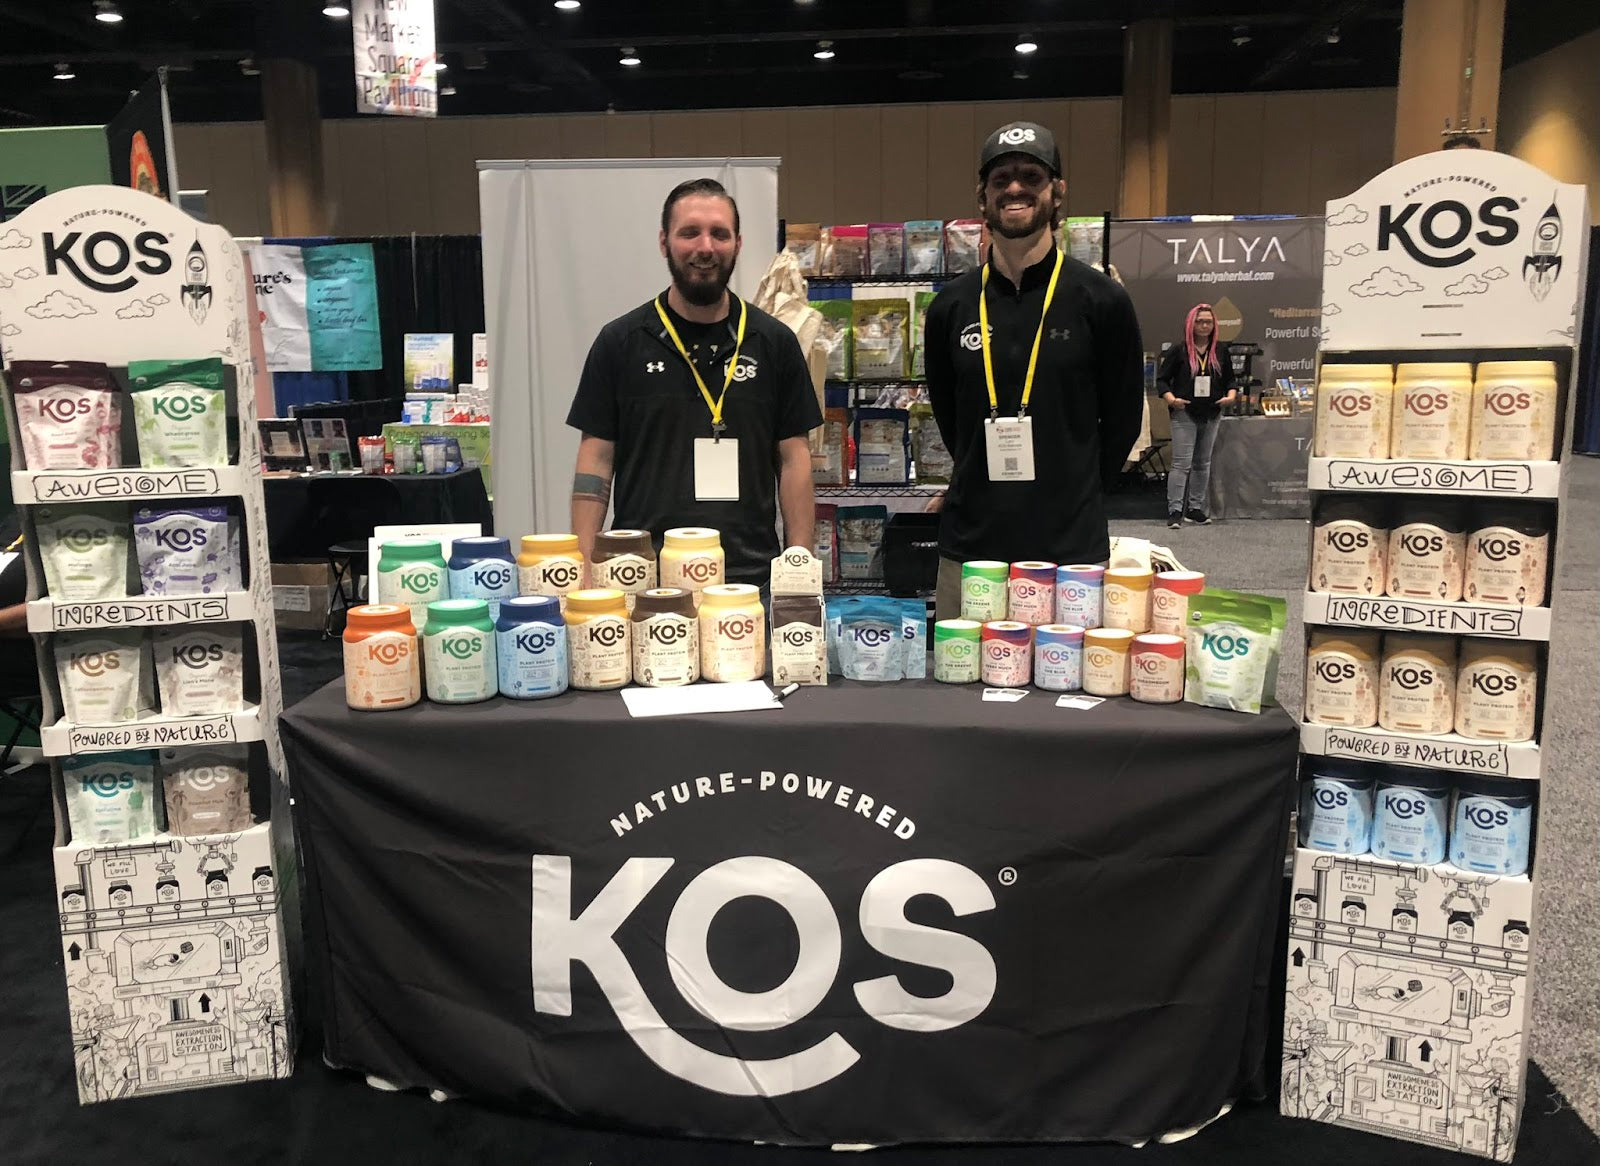 Two men stood behind a black table with KOS in large letters. The booth is enclosed by two high-standing displays with packaged protein powder.